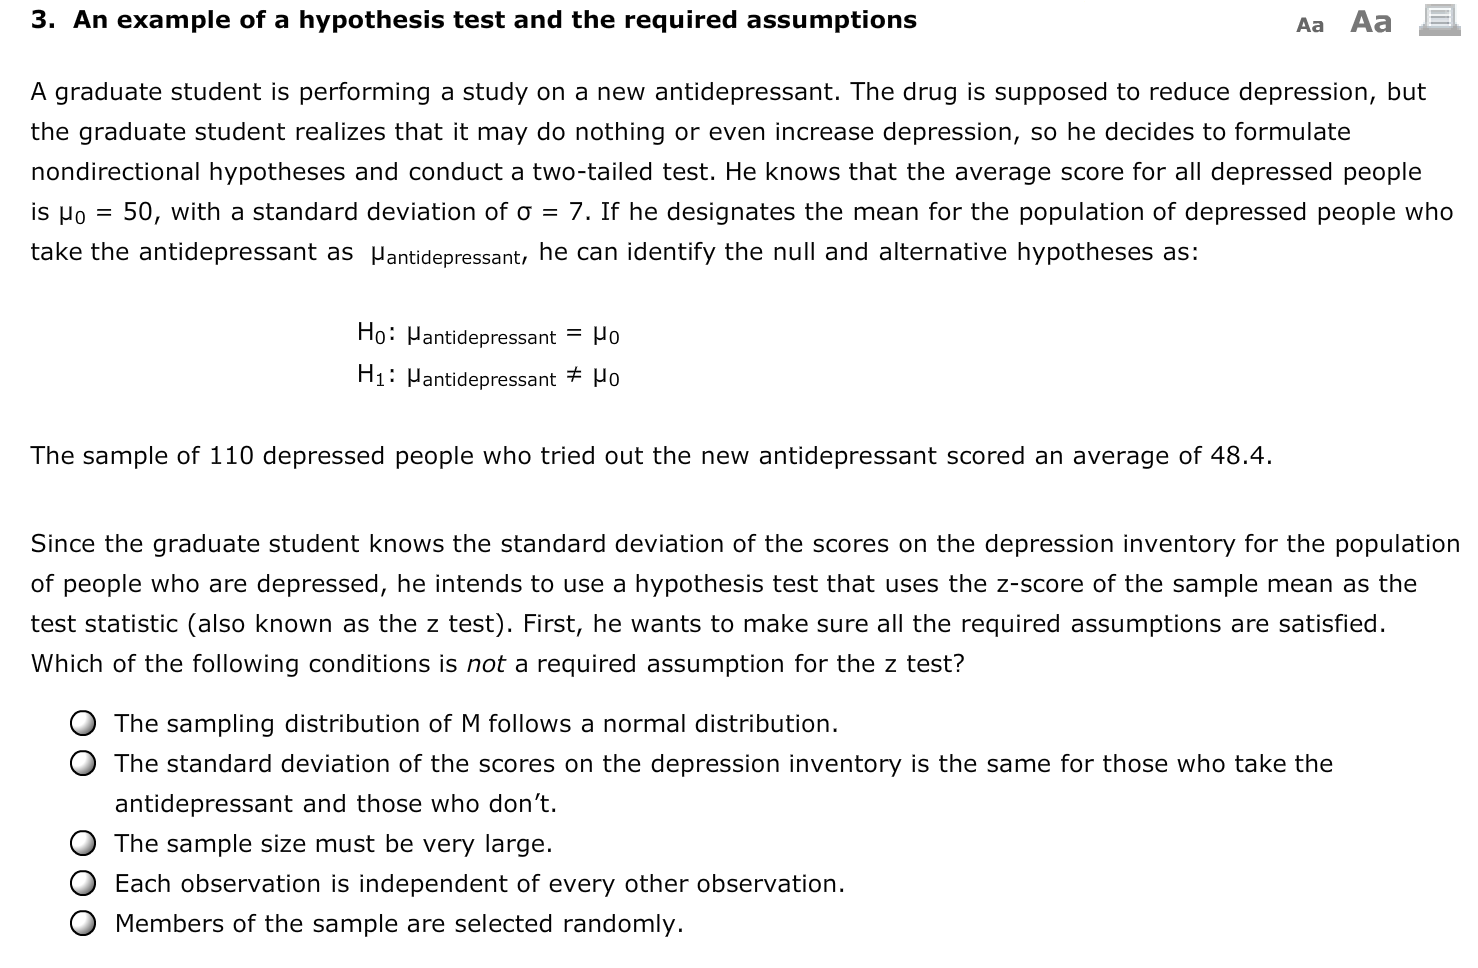 an example of a hypothesis test and the required assumptions